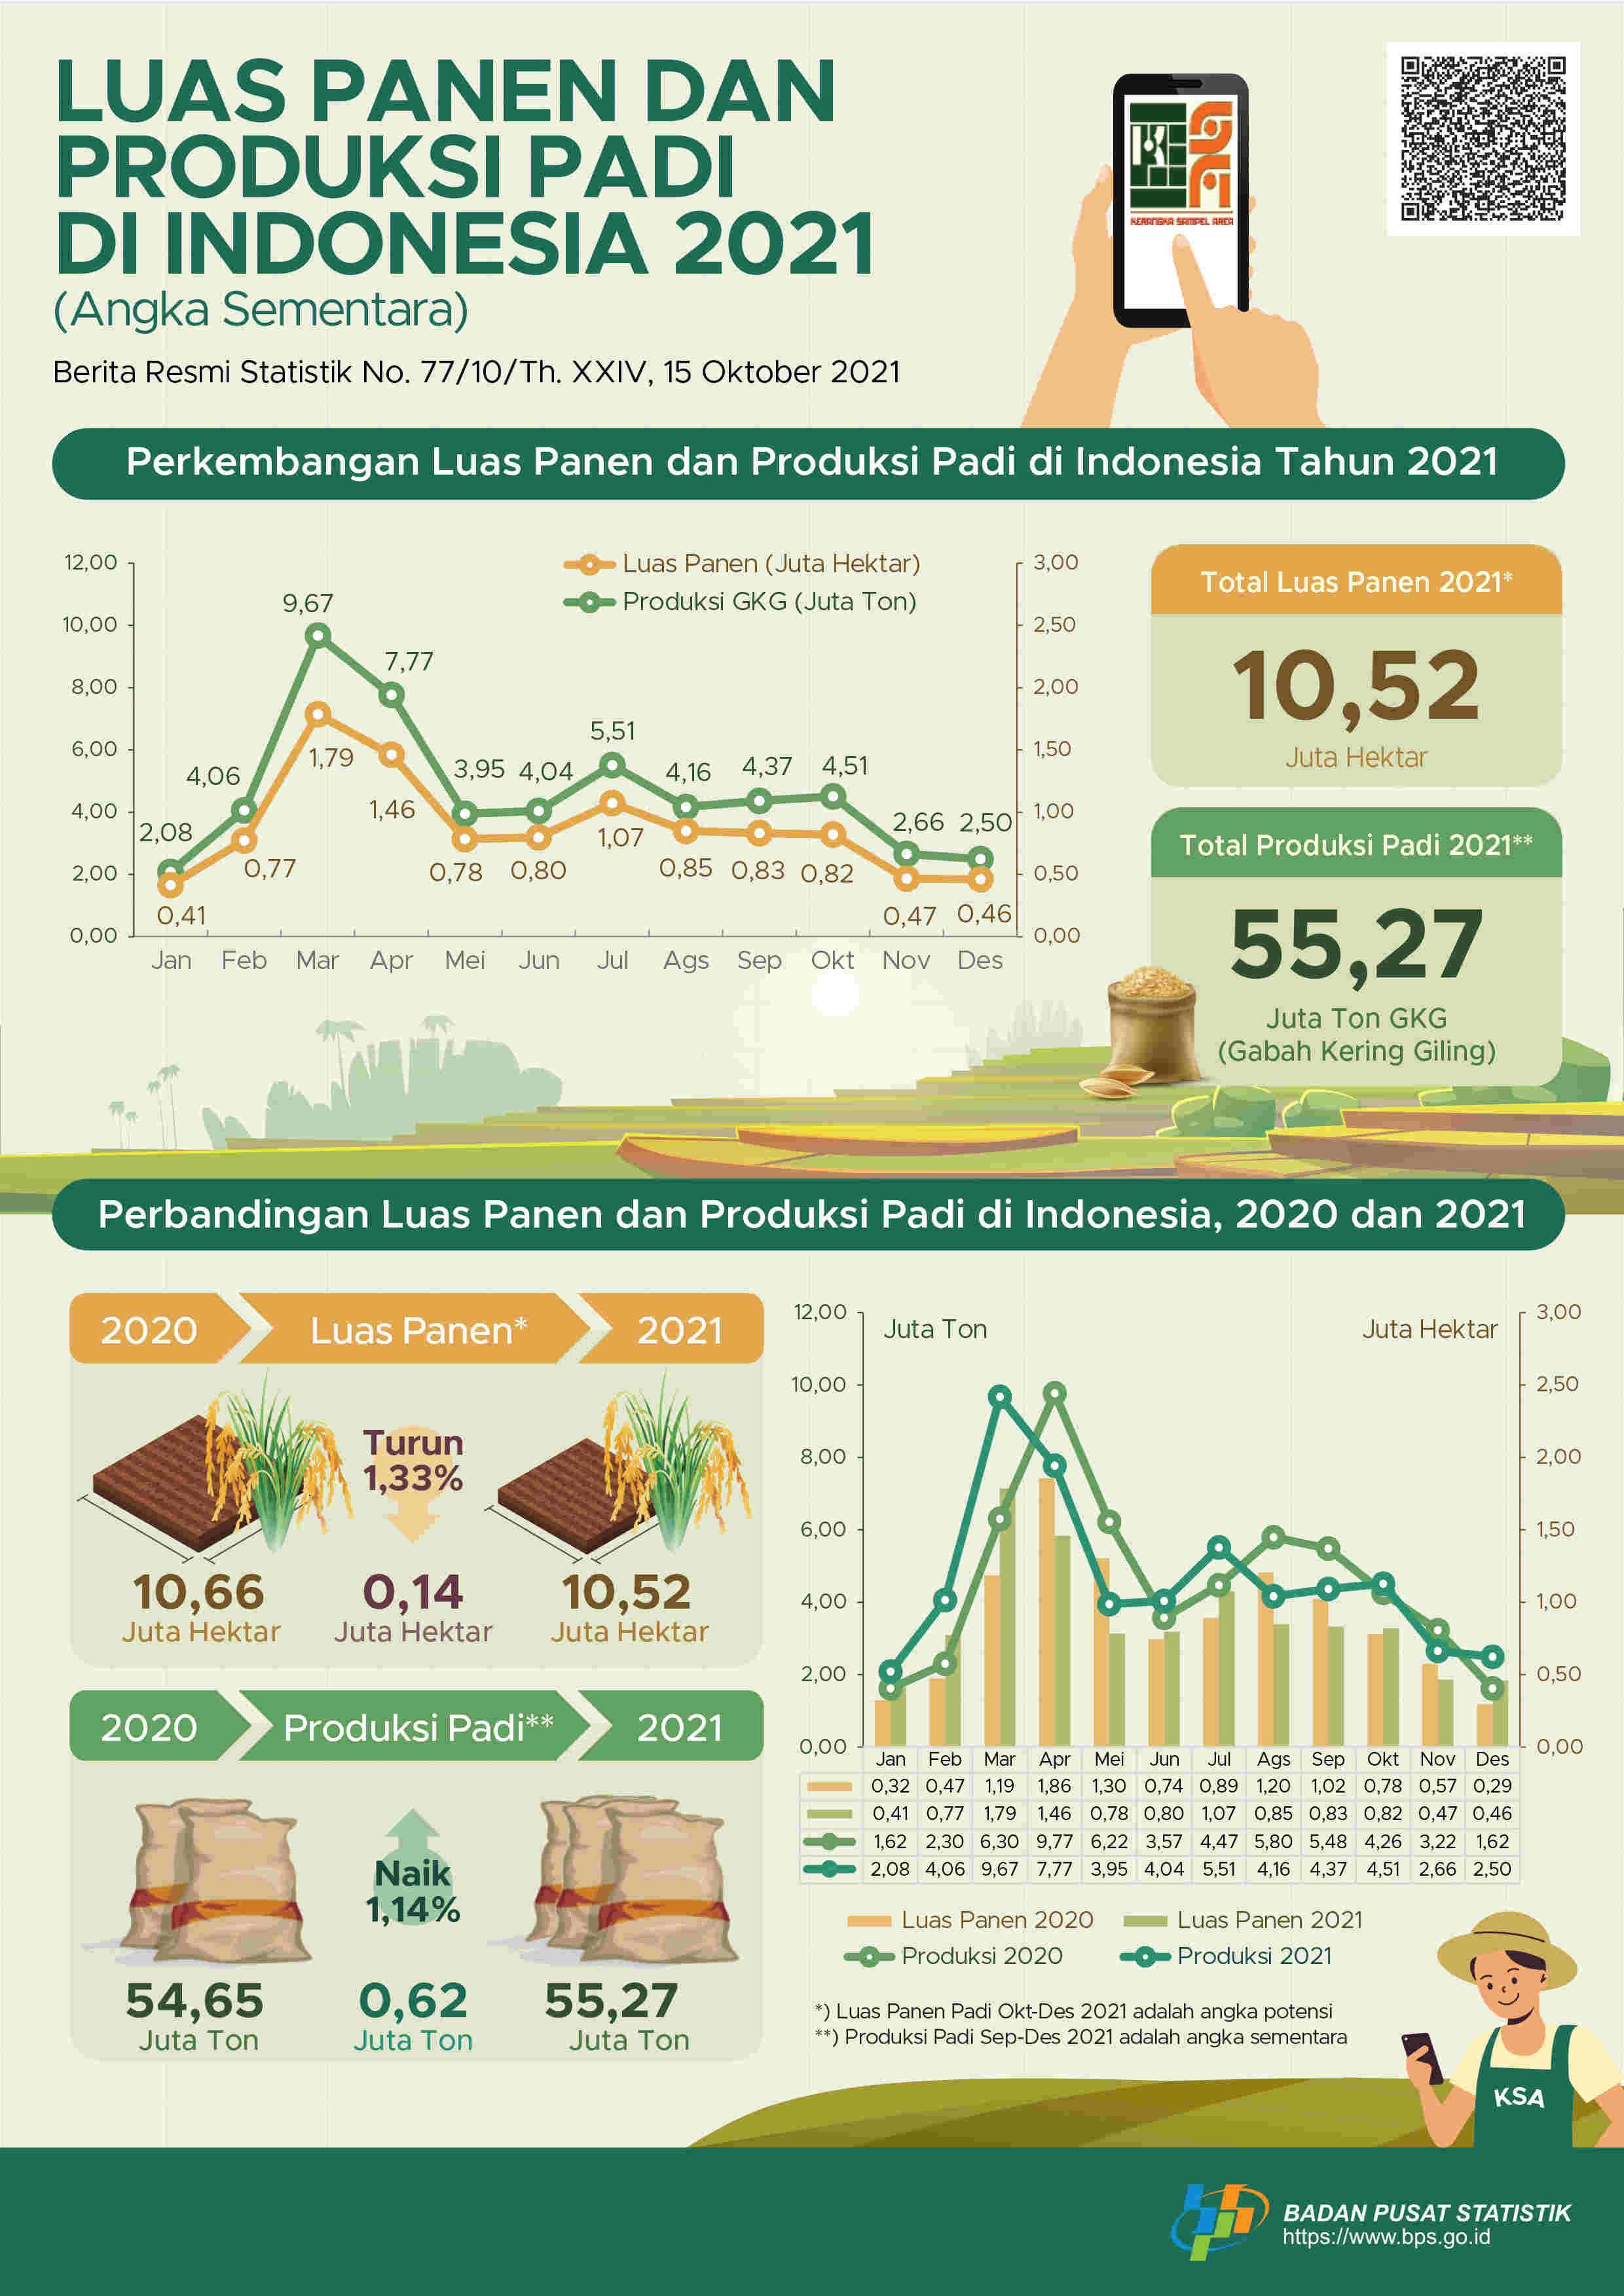 Production of paddy, maize and soybeans in 2021 increases 1.14 percent (Preliminary Figures)